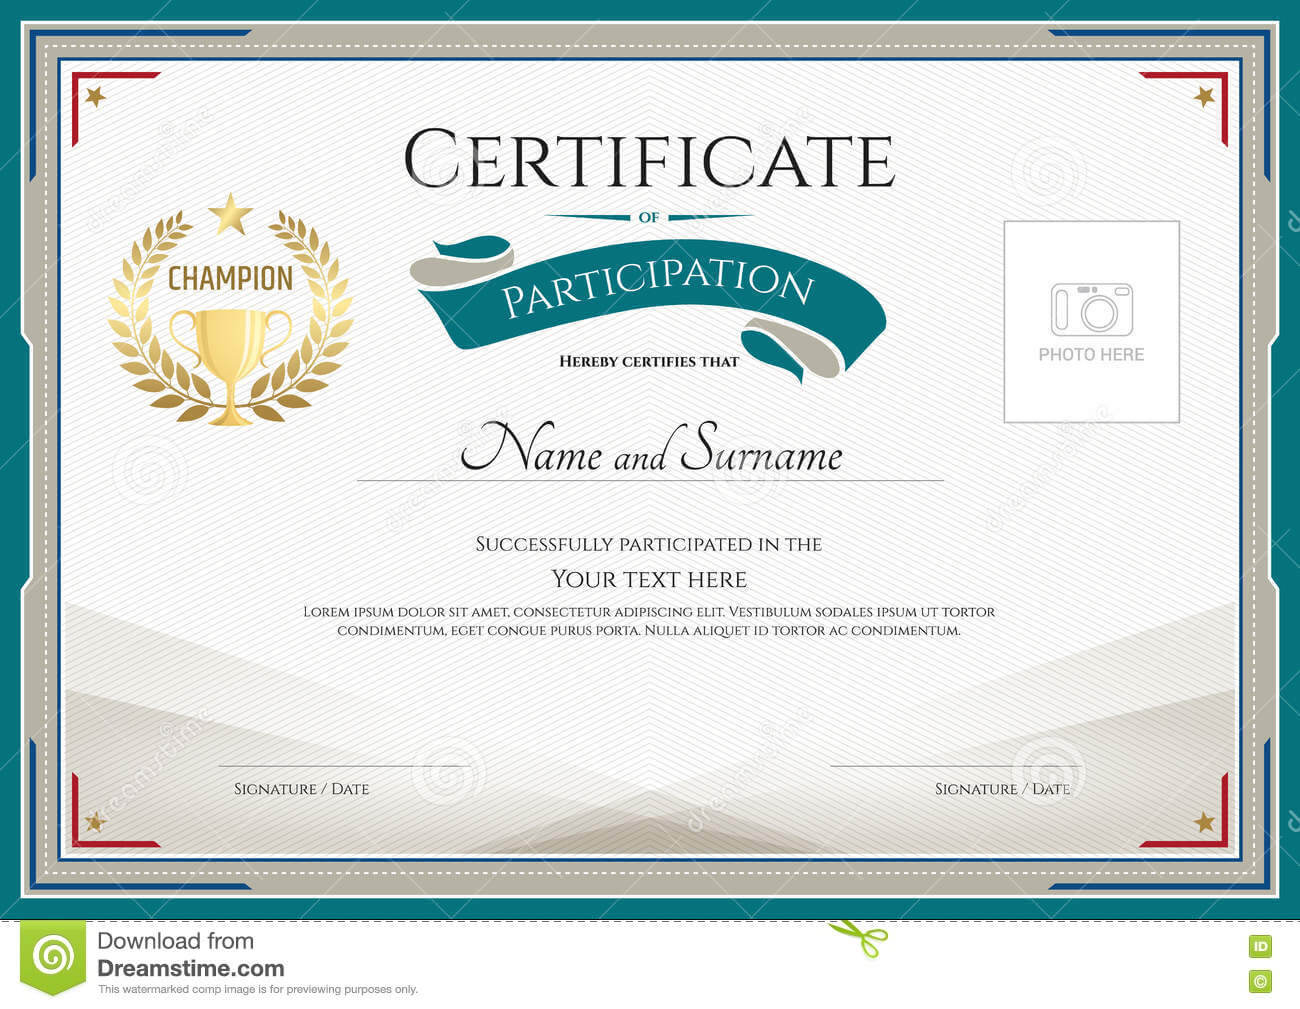 Certificate Of Participation Template With Green Broder Within Certificate Of Participation Word Template